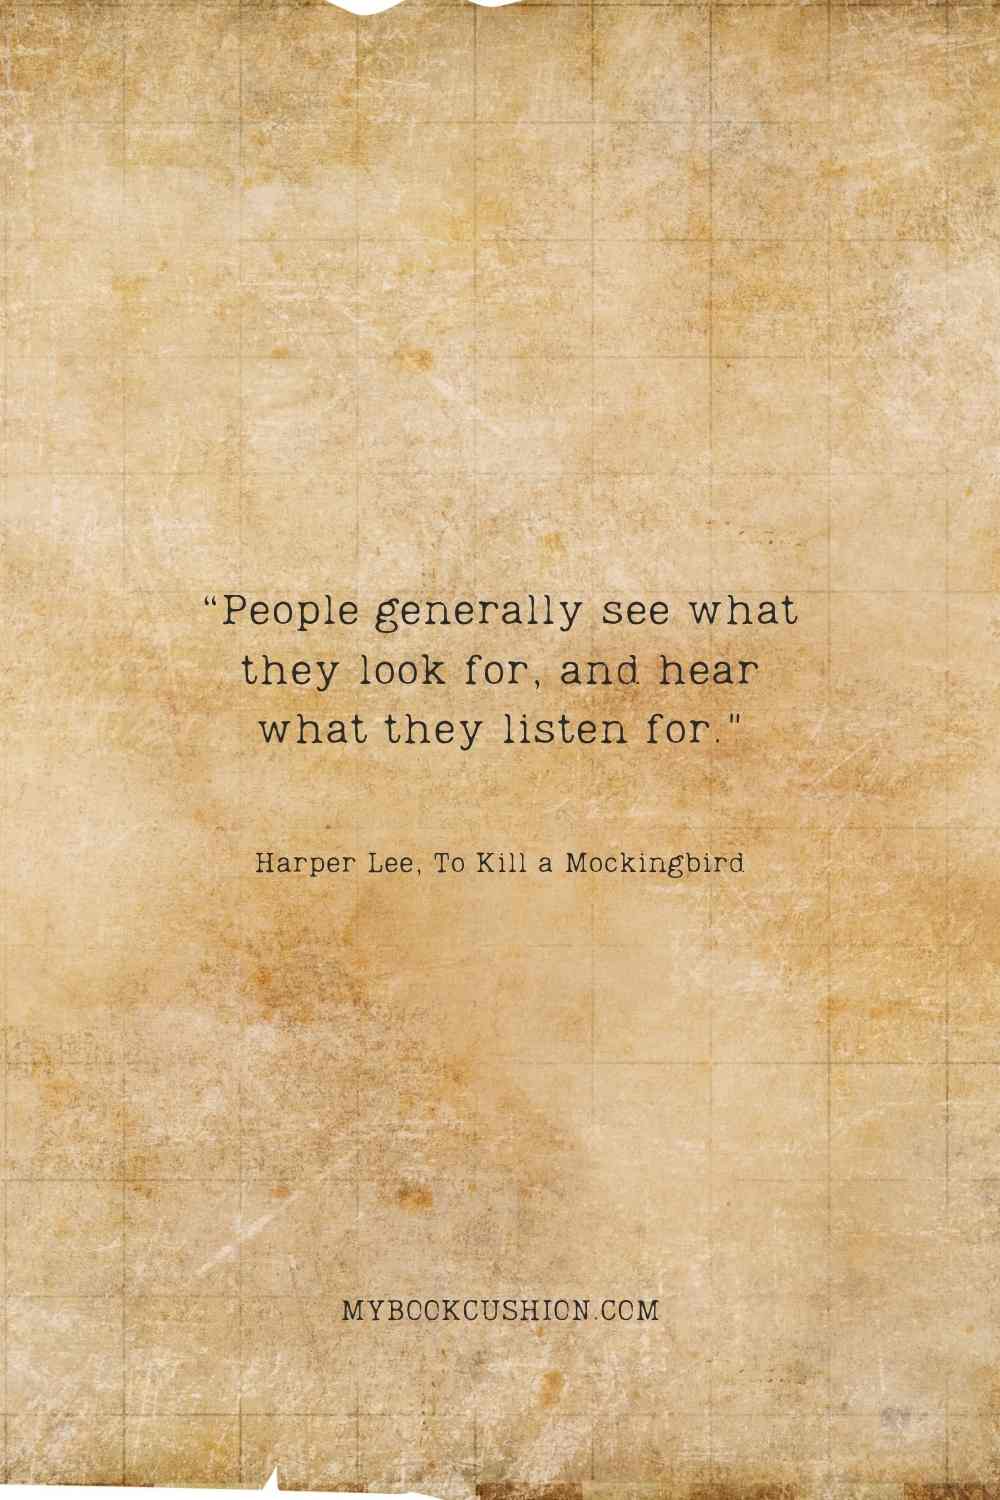 “People generally see what they look for, and hear what they listen for.” – Harper Lee, To Kill a Mockingbird